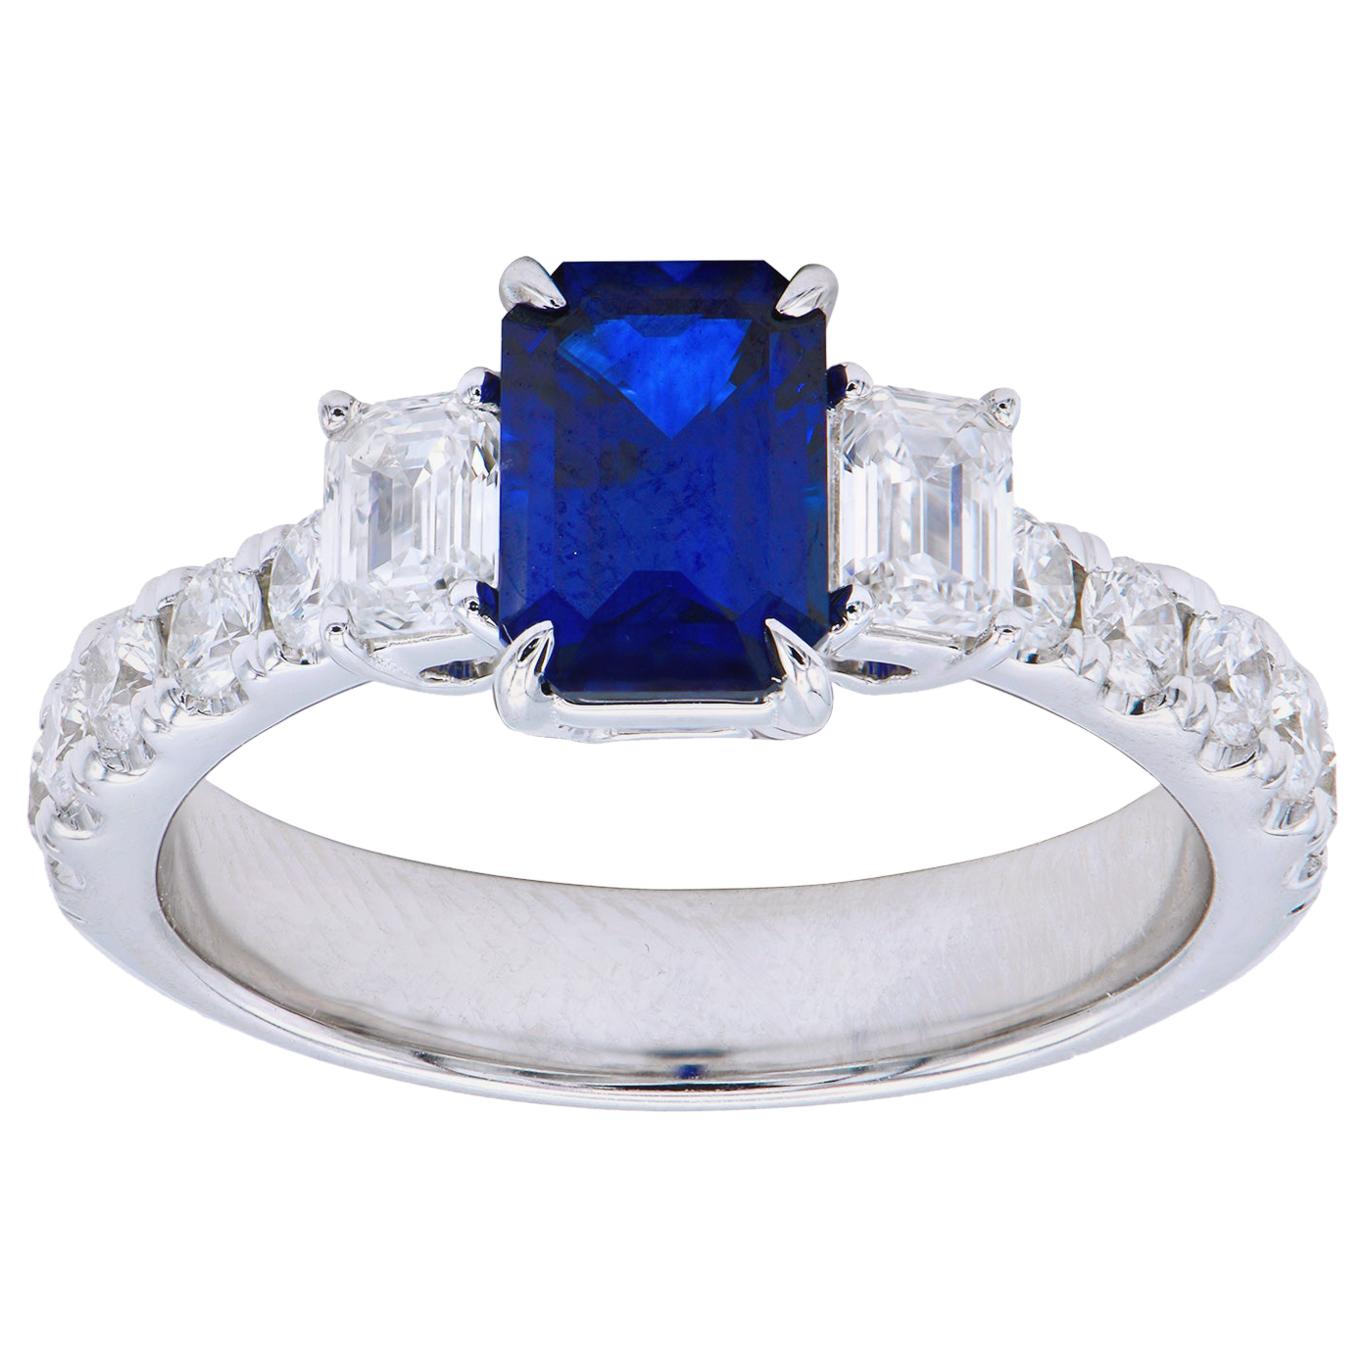 1.45 Carat Emerald Cut Sapphire Ring with Emerald Cut and Round Diamonds